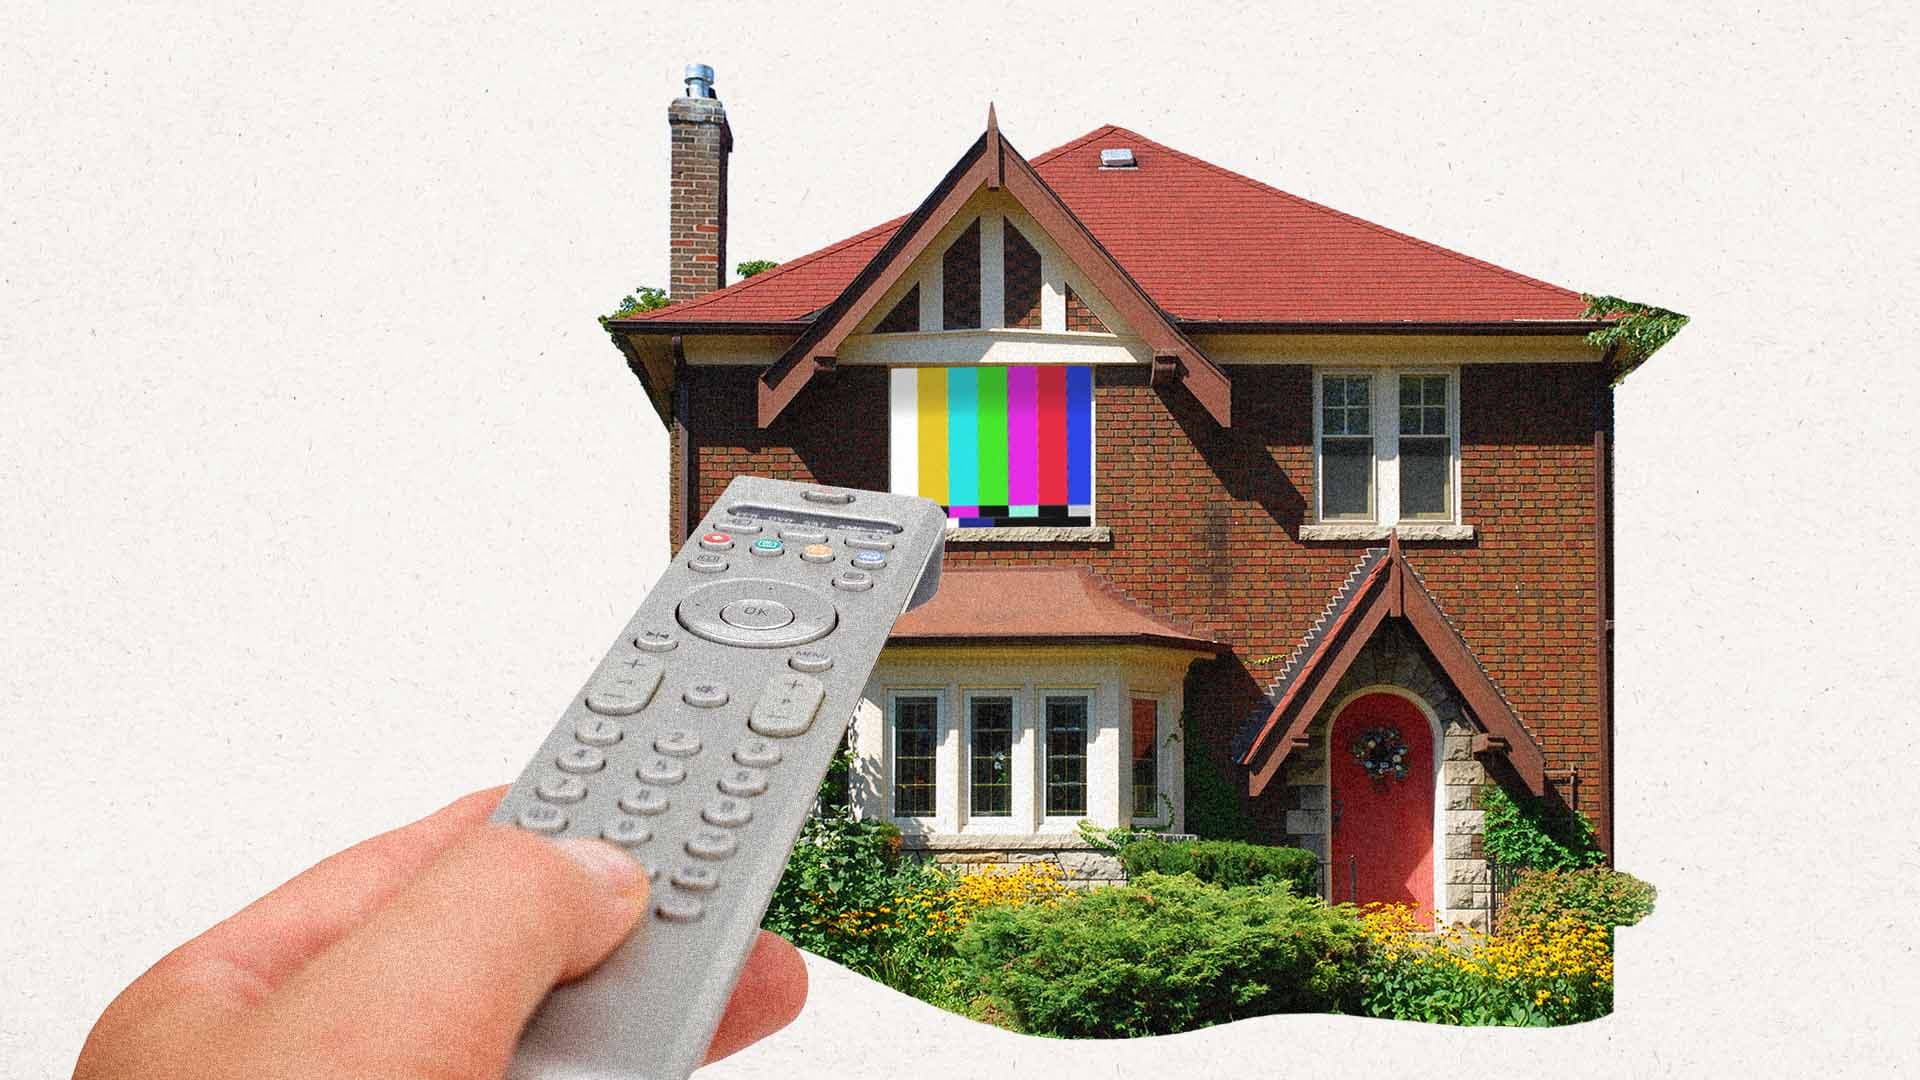 Collage of hand holding a TV remote aimed at a home with a TV in the window